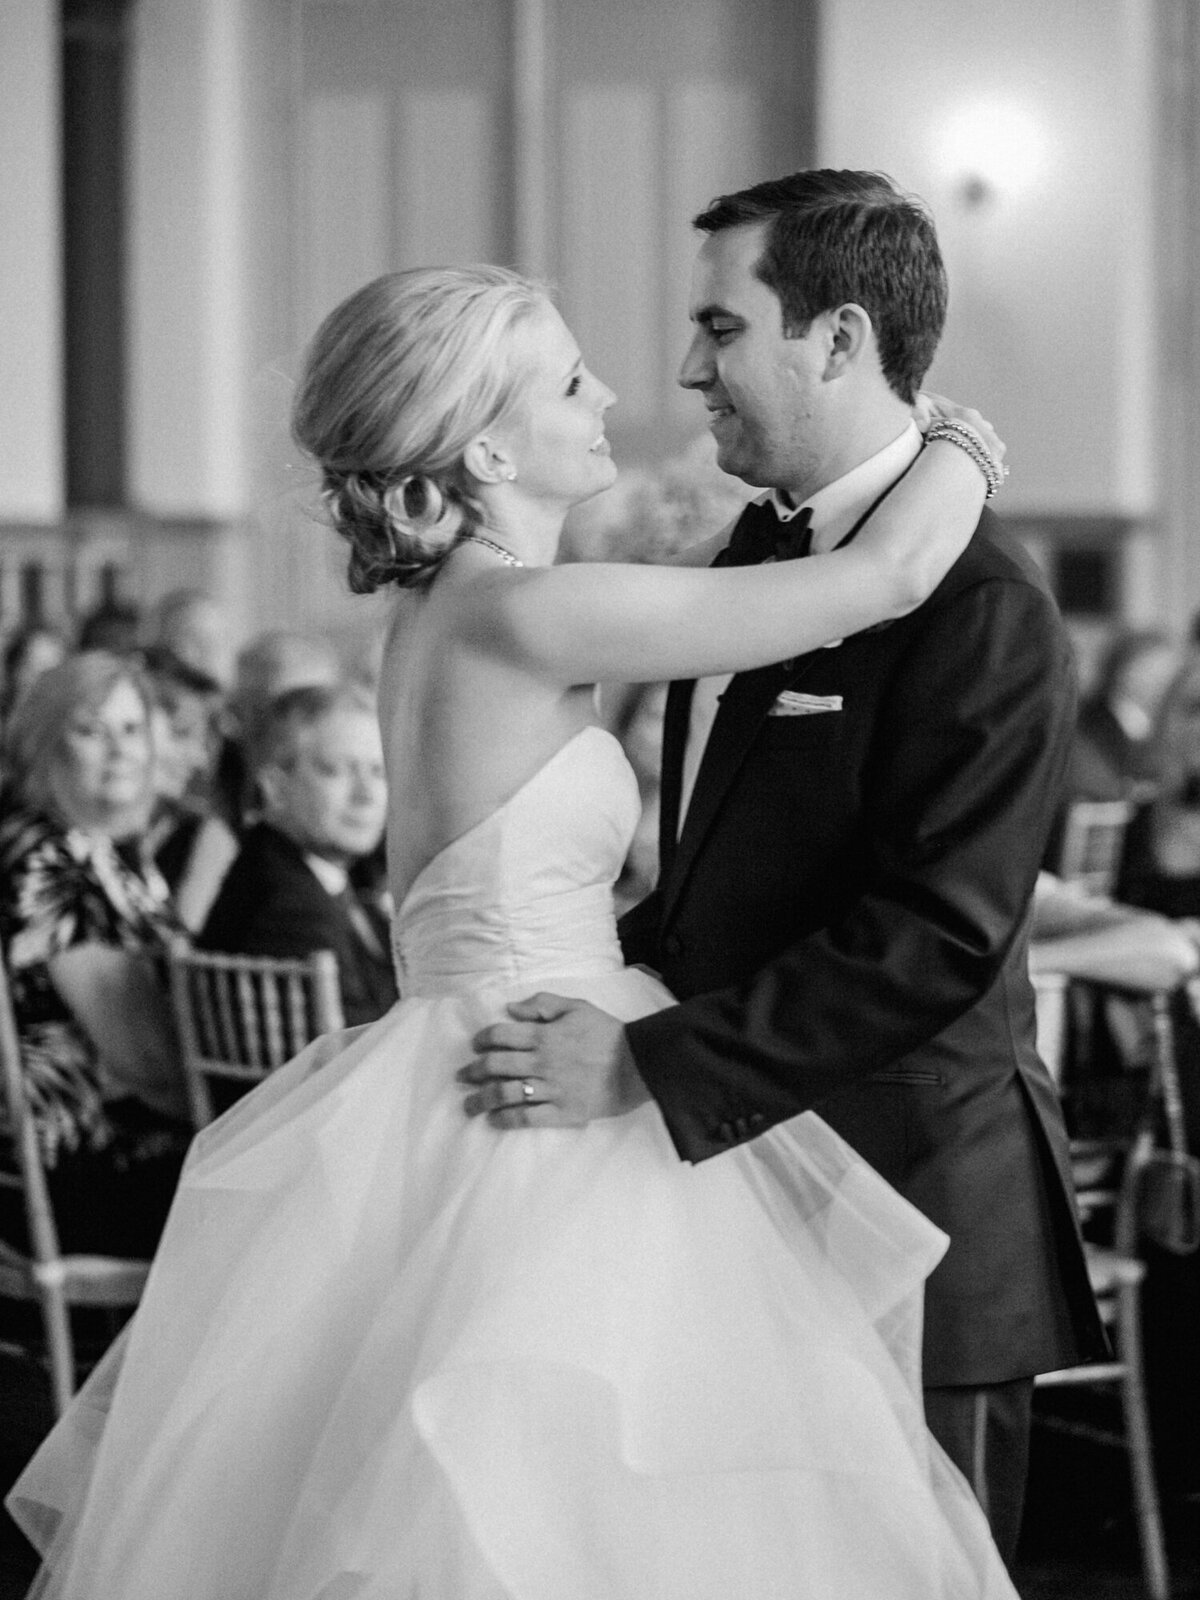 A beautiful black and white photo of newlyweds sharing their first dance at a ballroom in Chicago